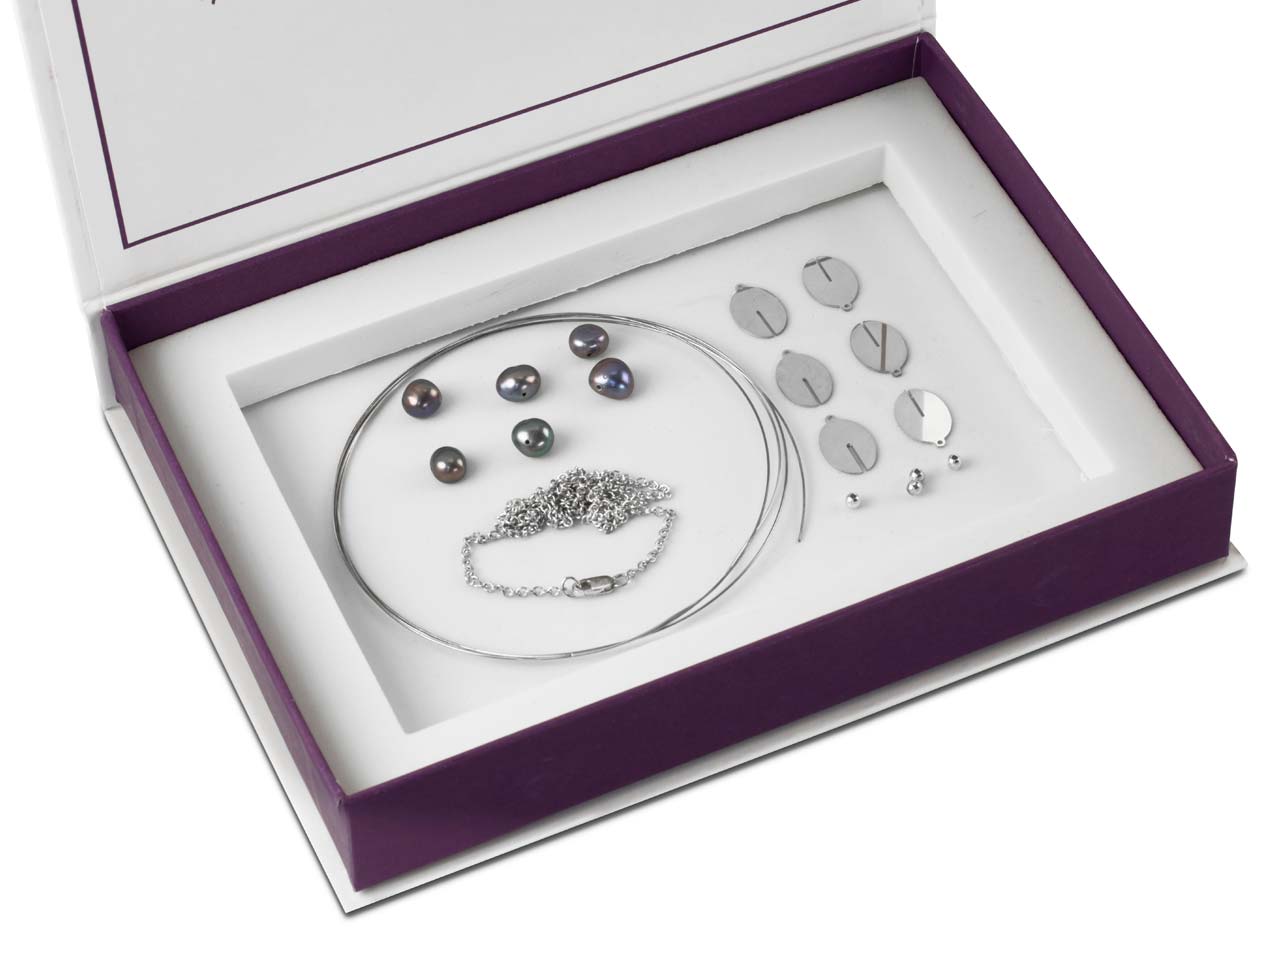 Argentium Silver Slotted Oval And Pearl Necklace Kit Questions & Answers